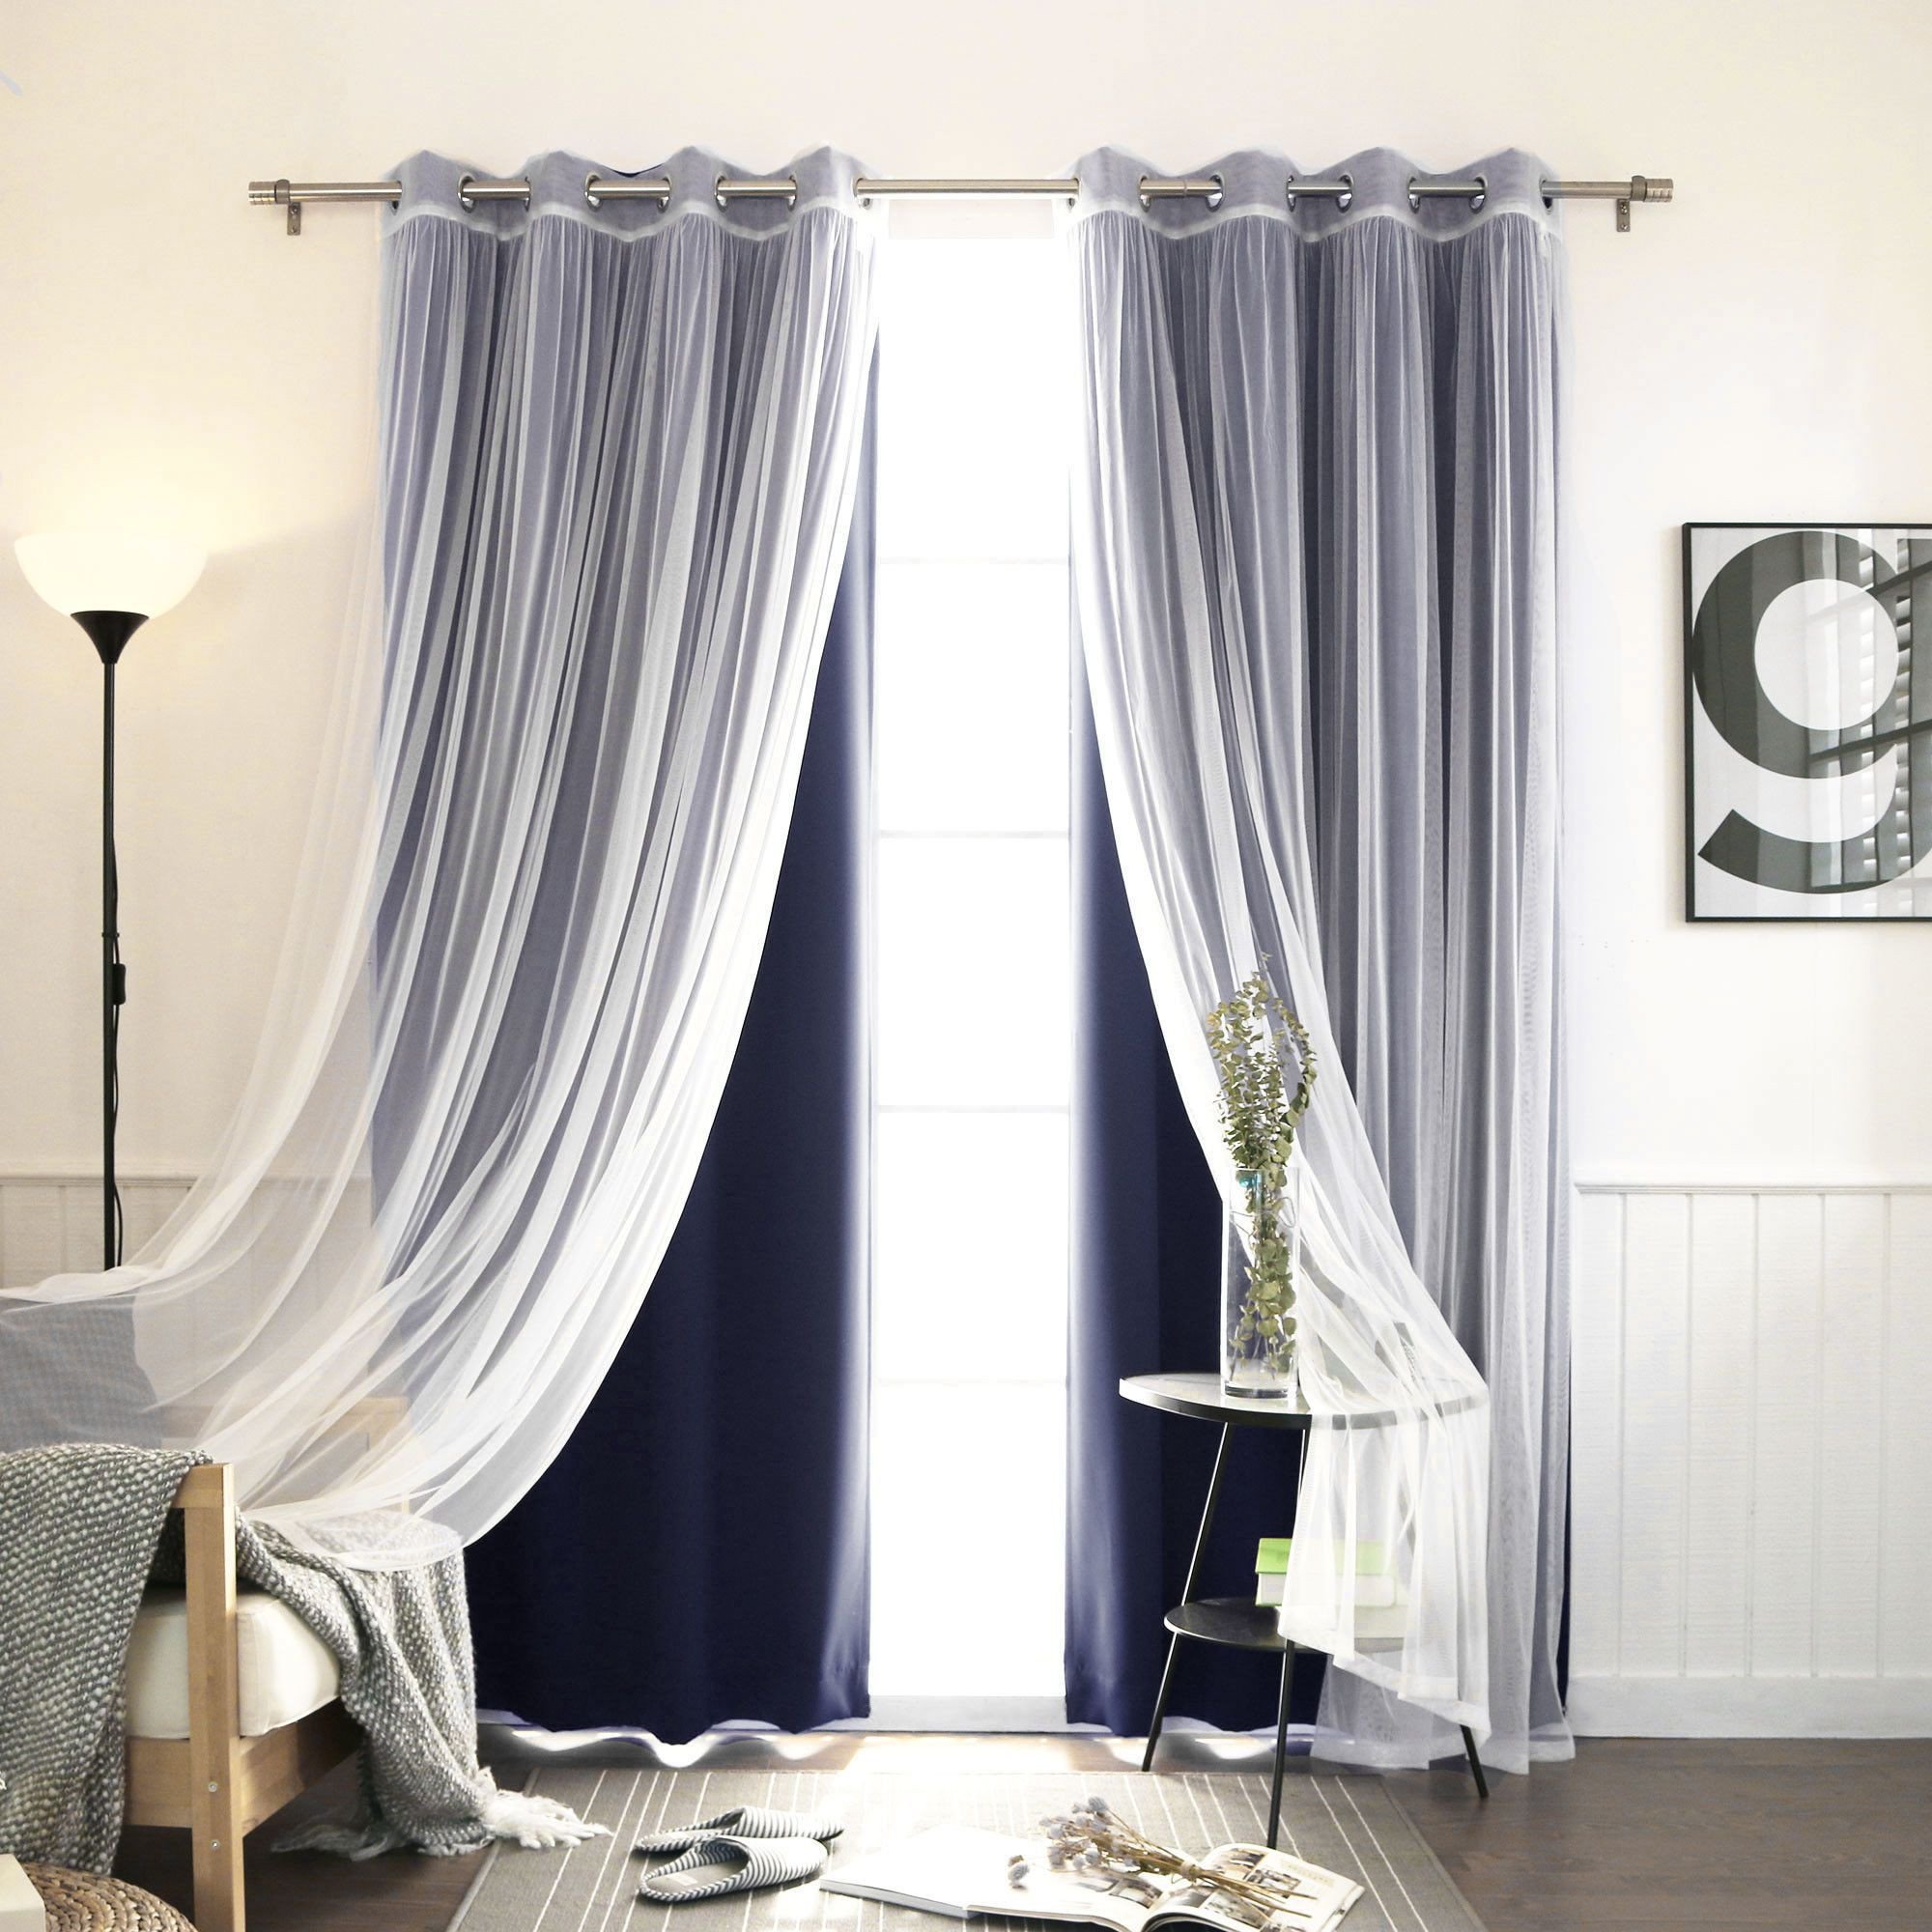 Black and White Bedroom Curtains Luxury solid Blackout thermal Grommet Curtain Panels Set Of 2